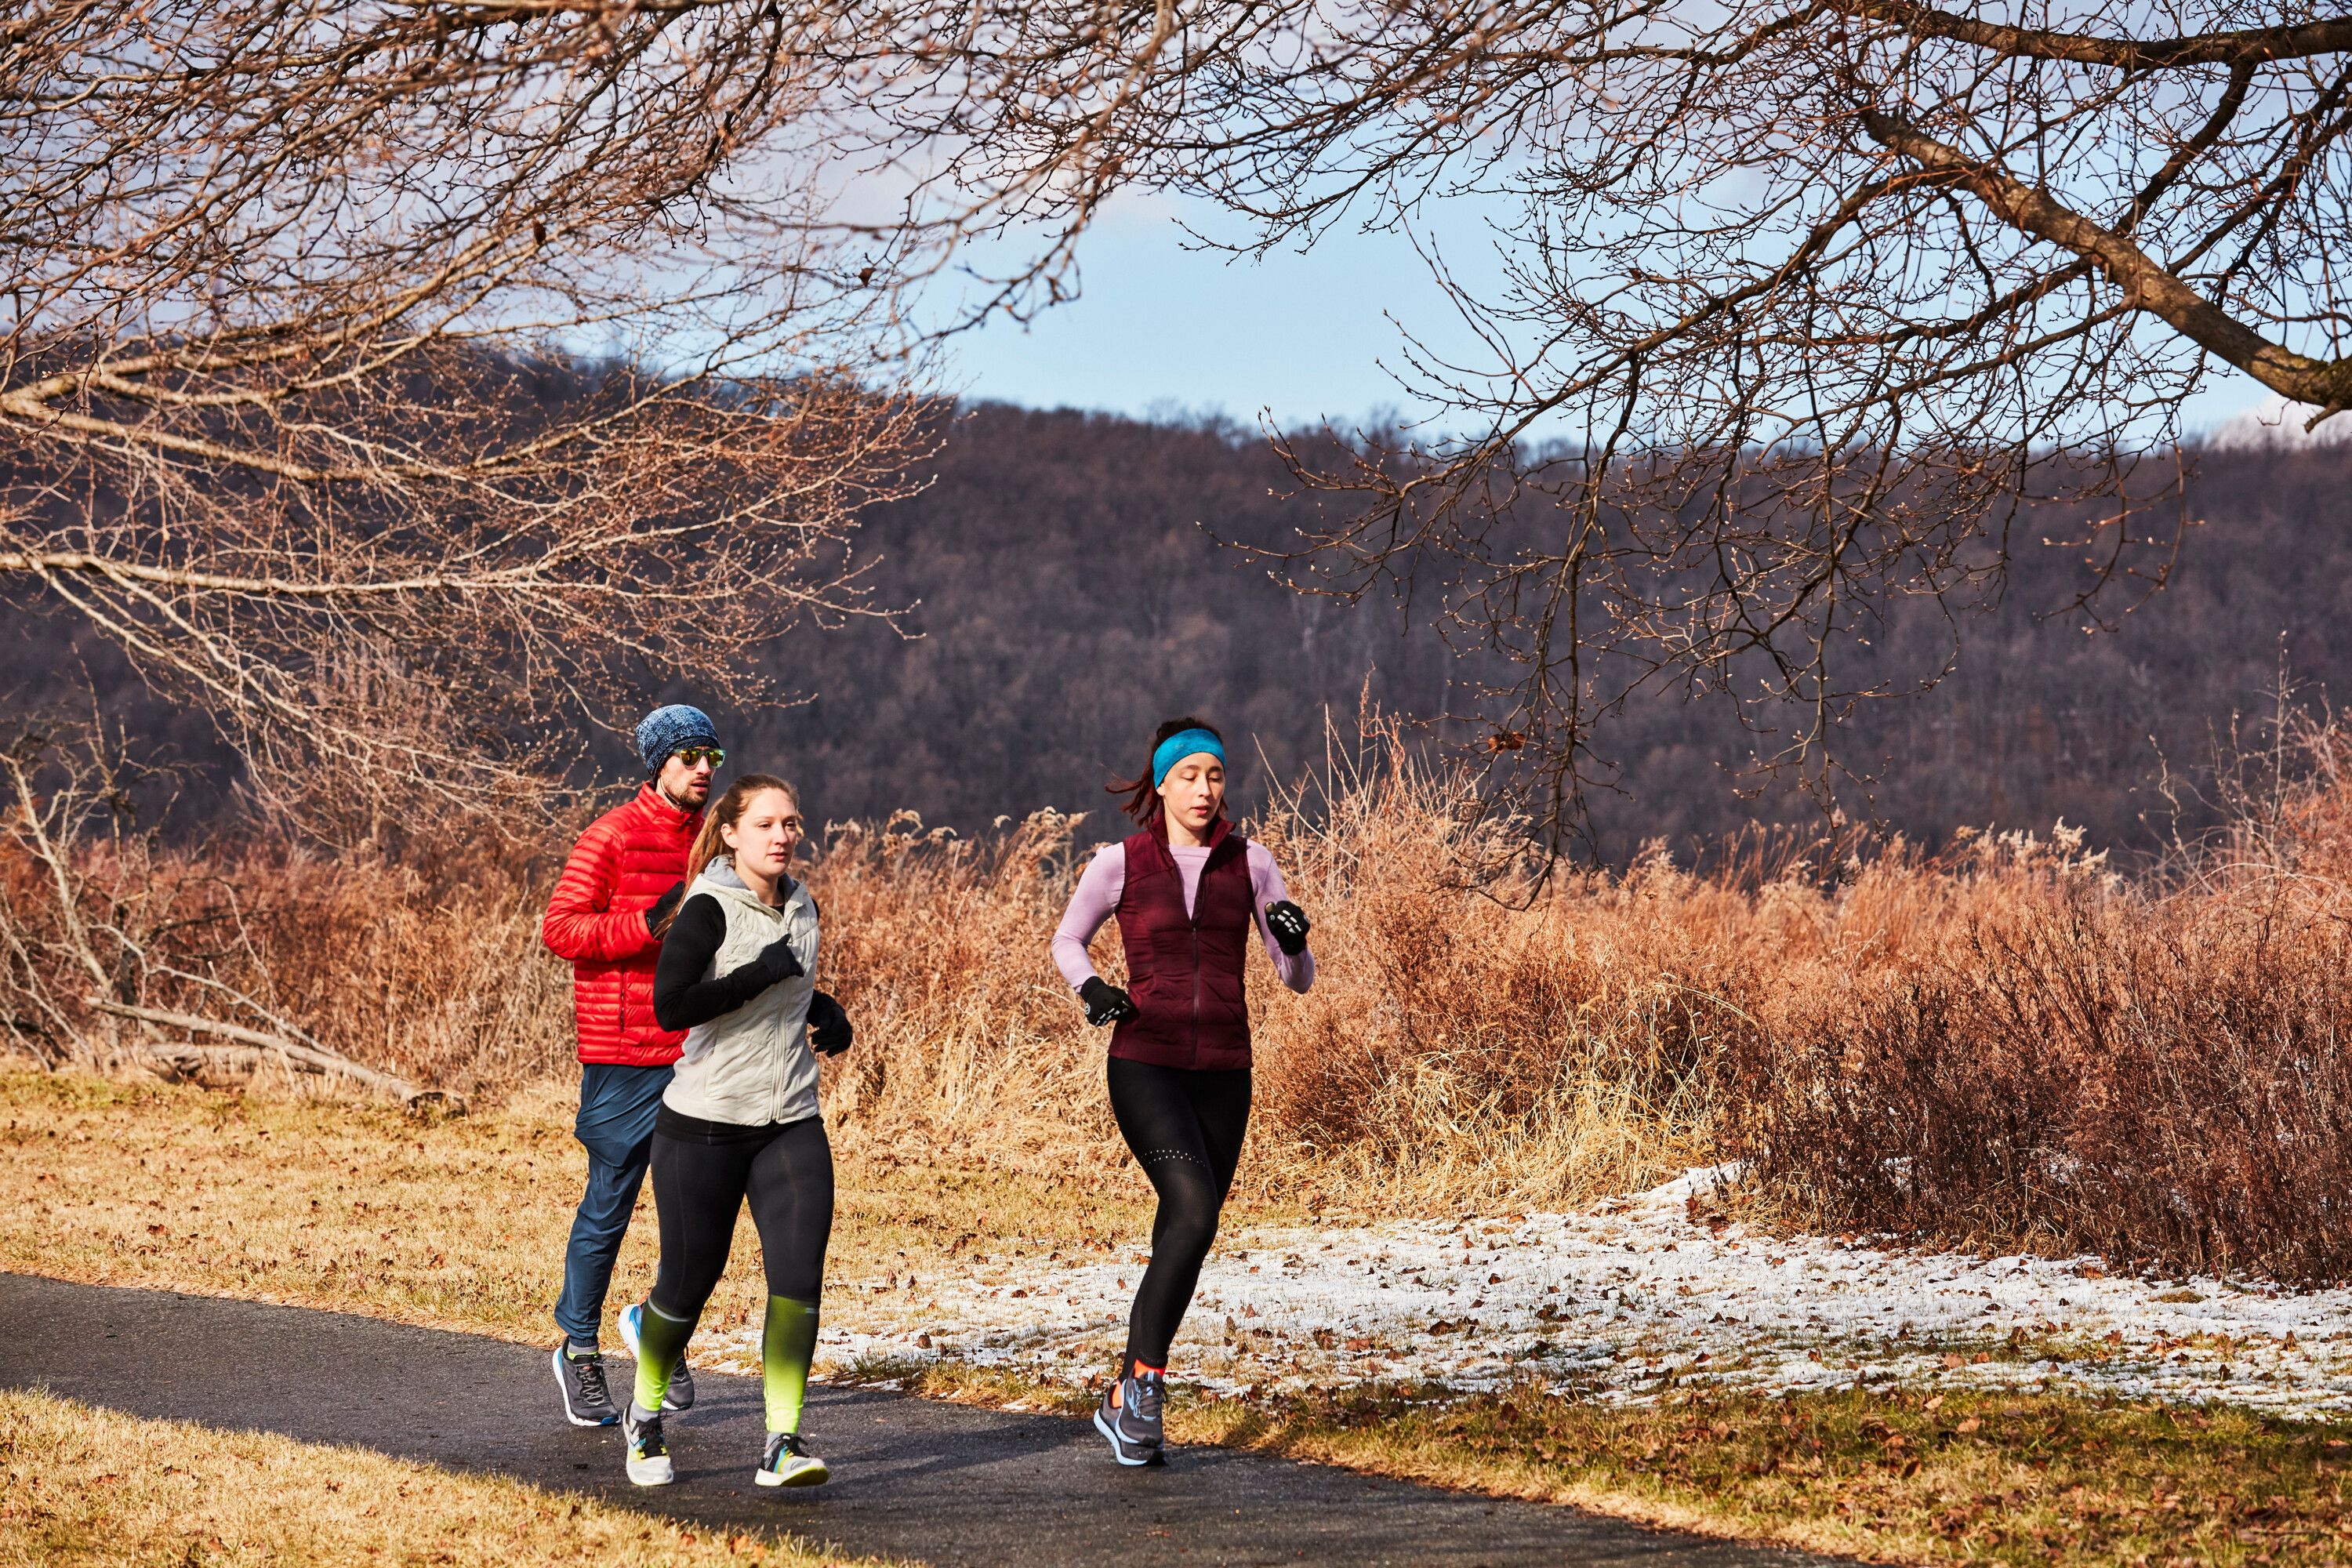 The Best Winter Running Shoes, According to Coaches